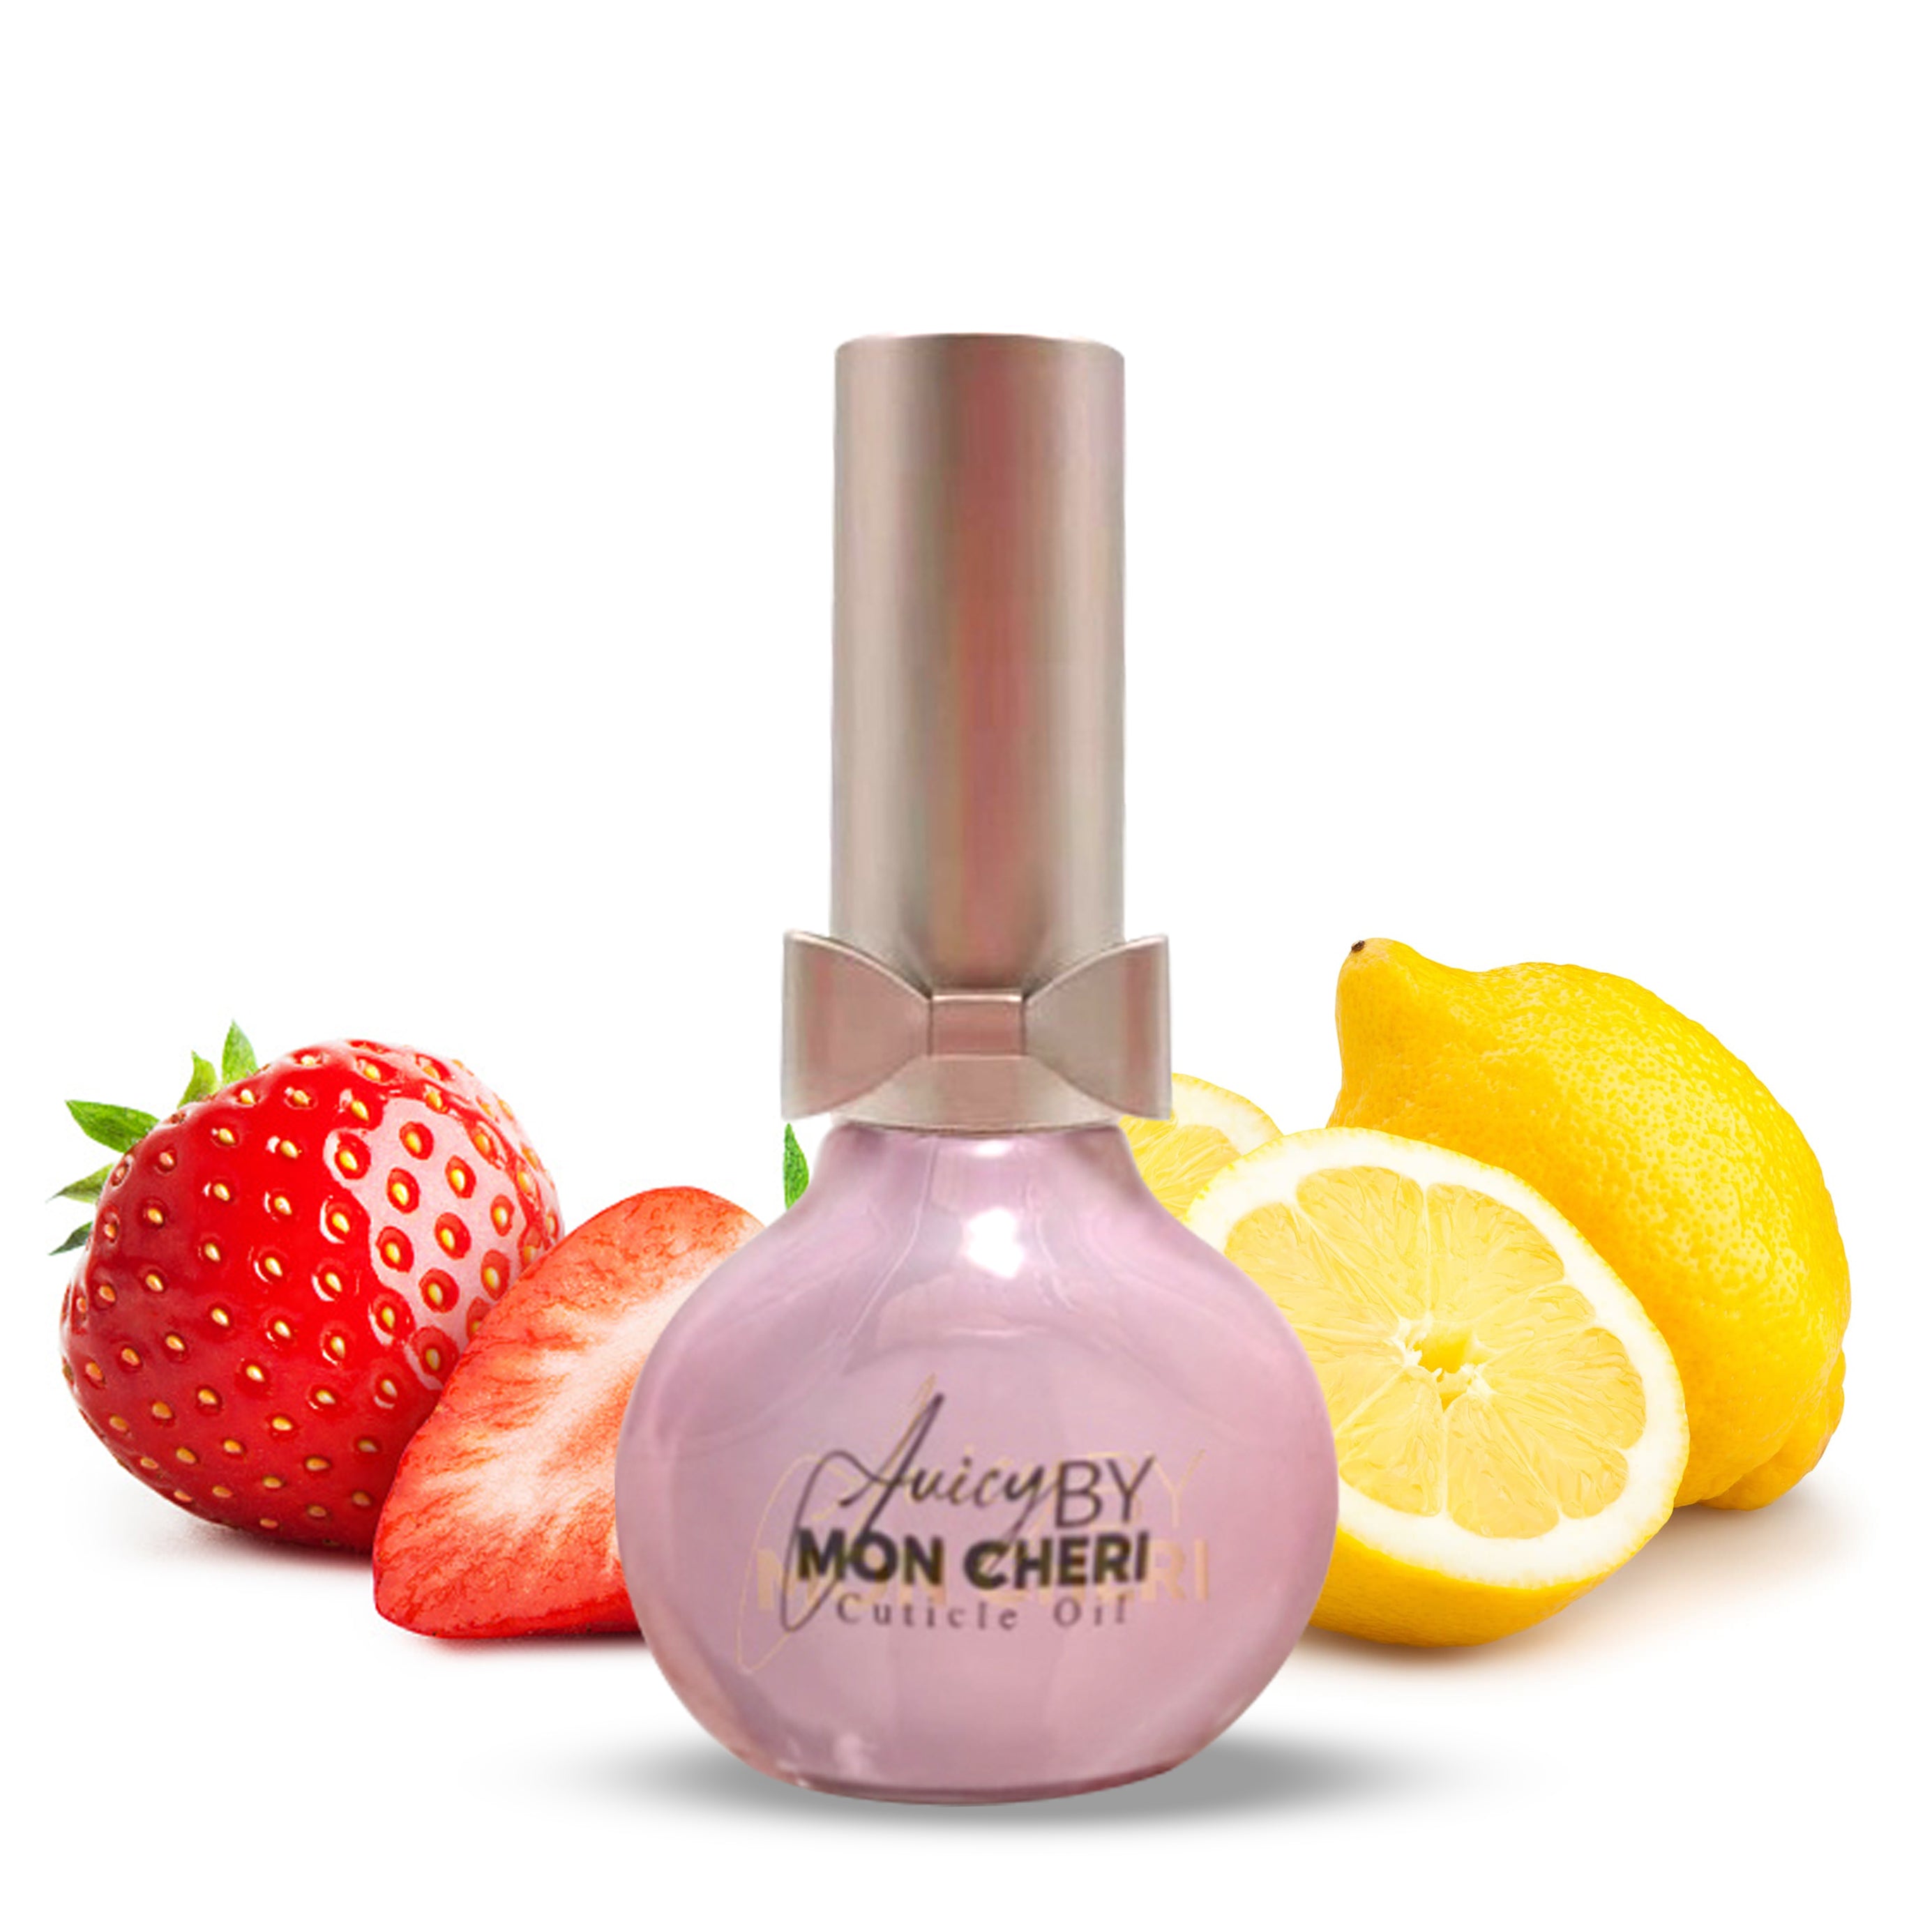 Soothing Strawberry Lemonade Cuticle Oil by Juicy by Mon Cheri